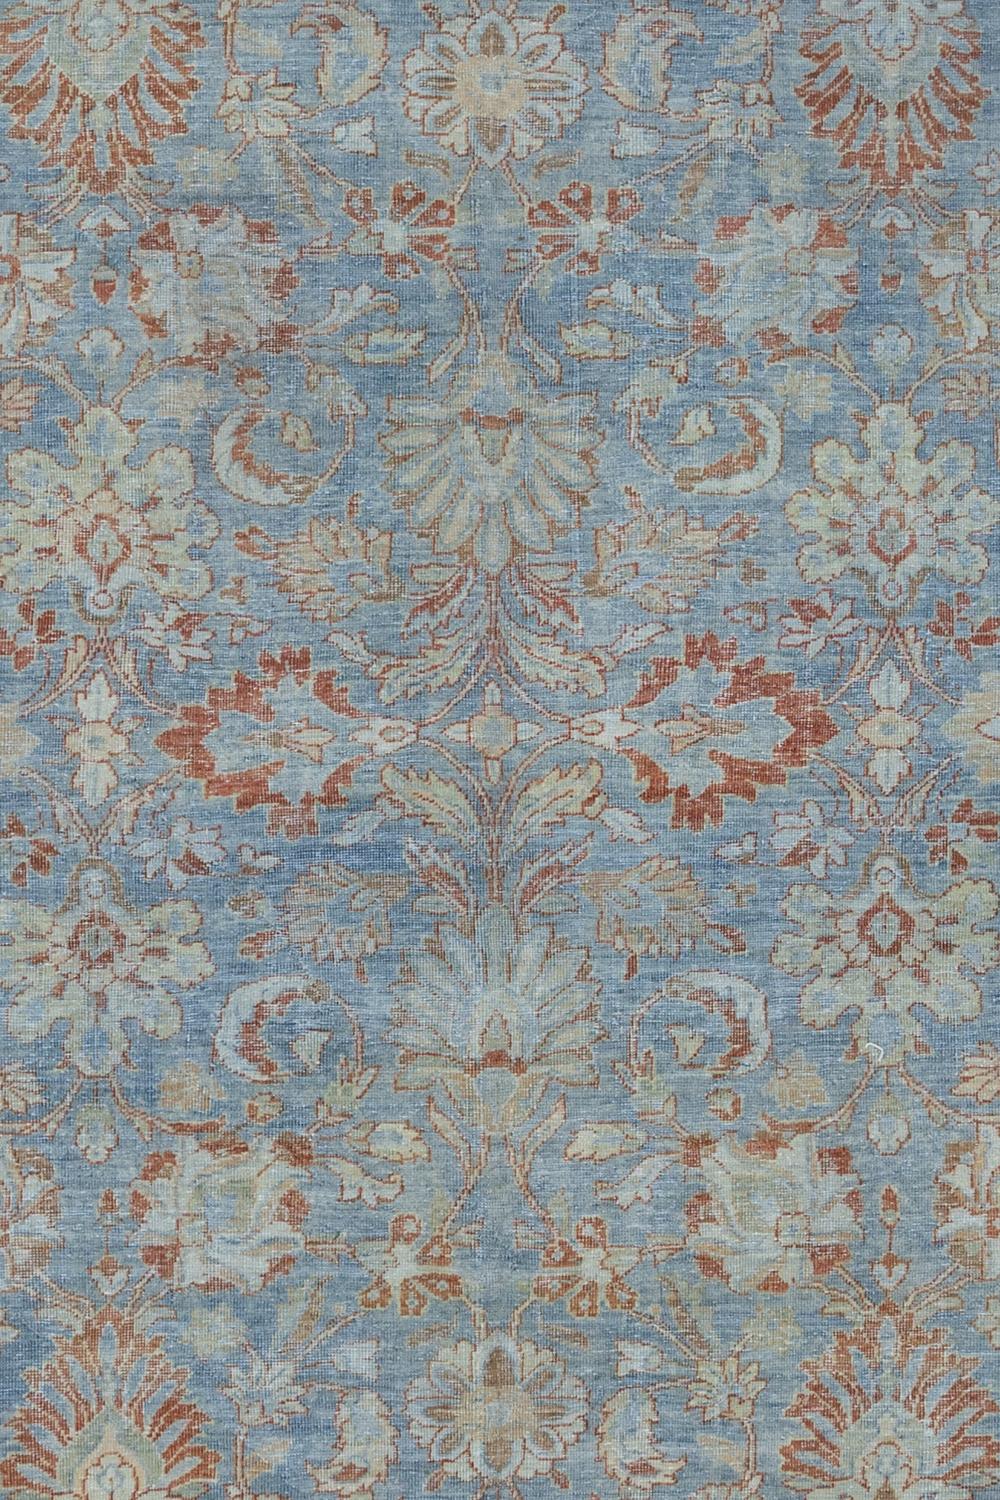 Age: Circa 1920

Colors: blue, pale red

Pile: medium

Wear Notes: 1

Material: wool on cotton

Early 20th century Mahal with a pastel blue field under a floral motif. Luxurious soft pile in excellent condition.

Wear Guide:
Vintage and